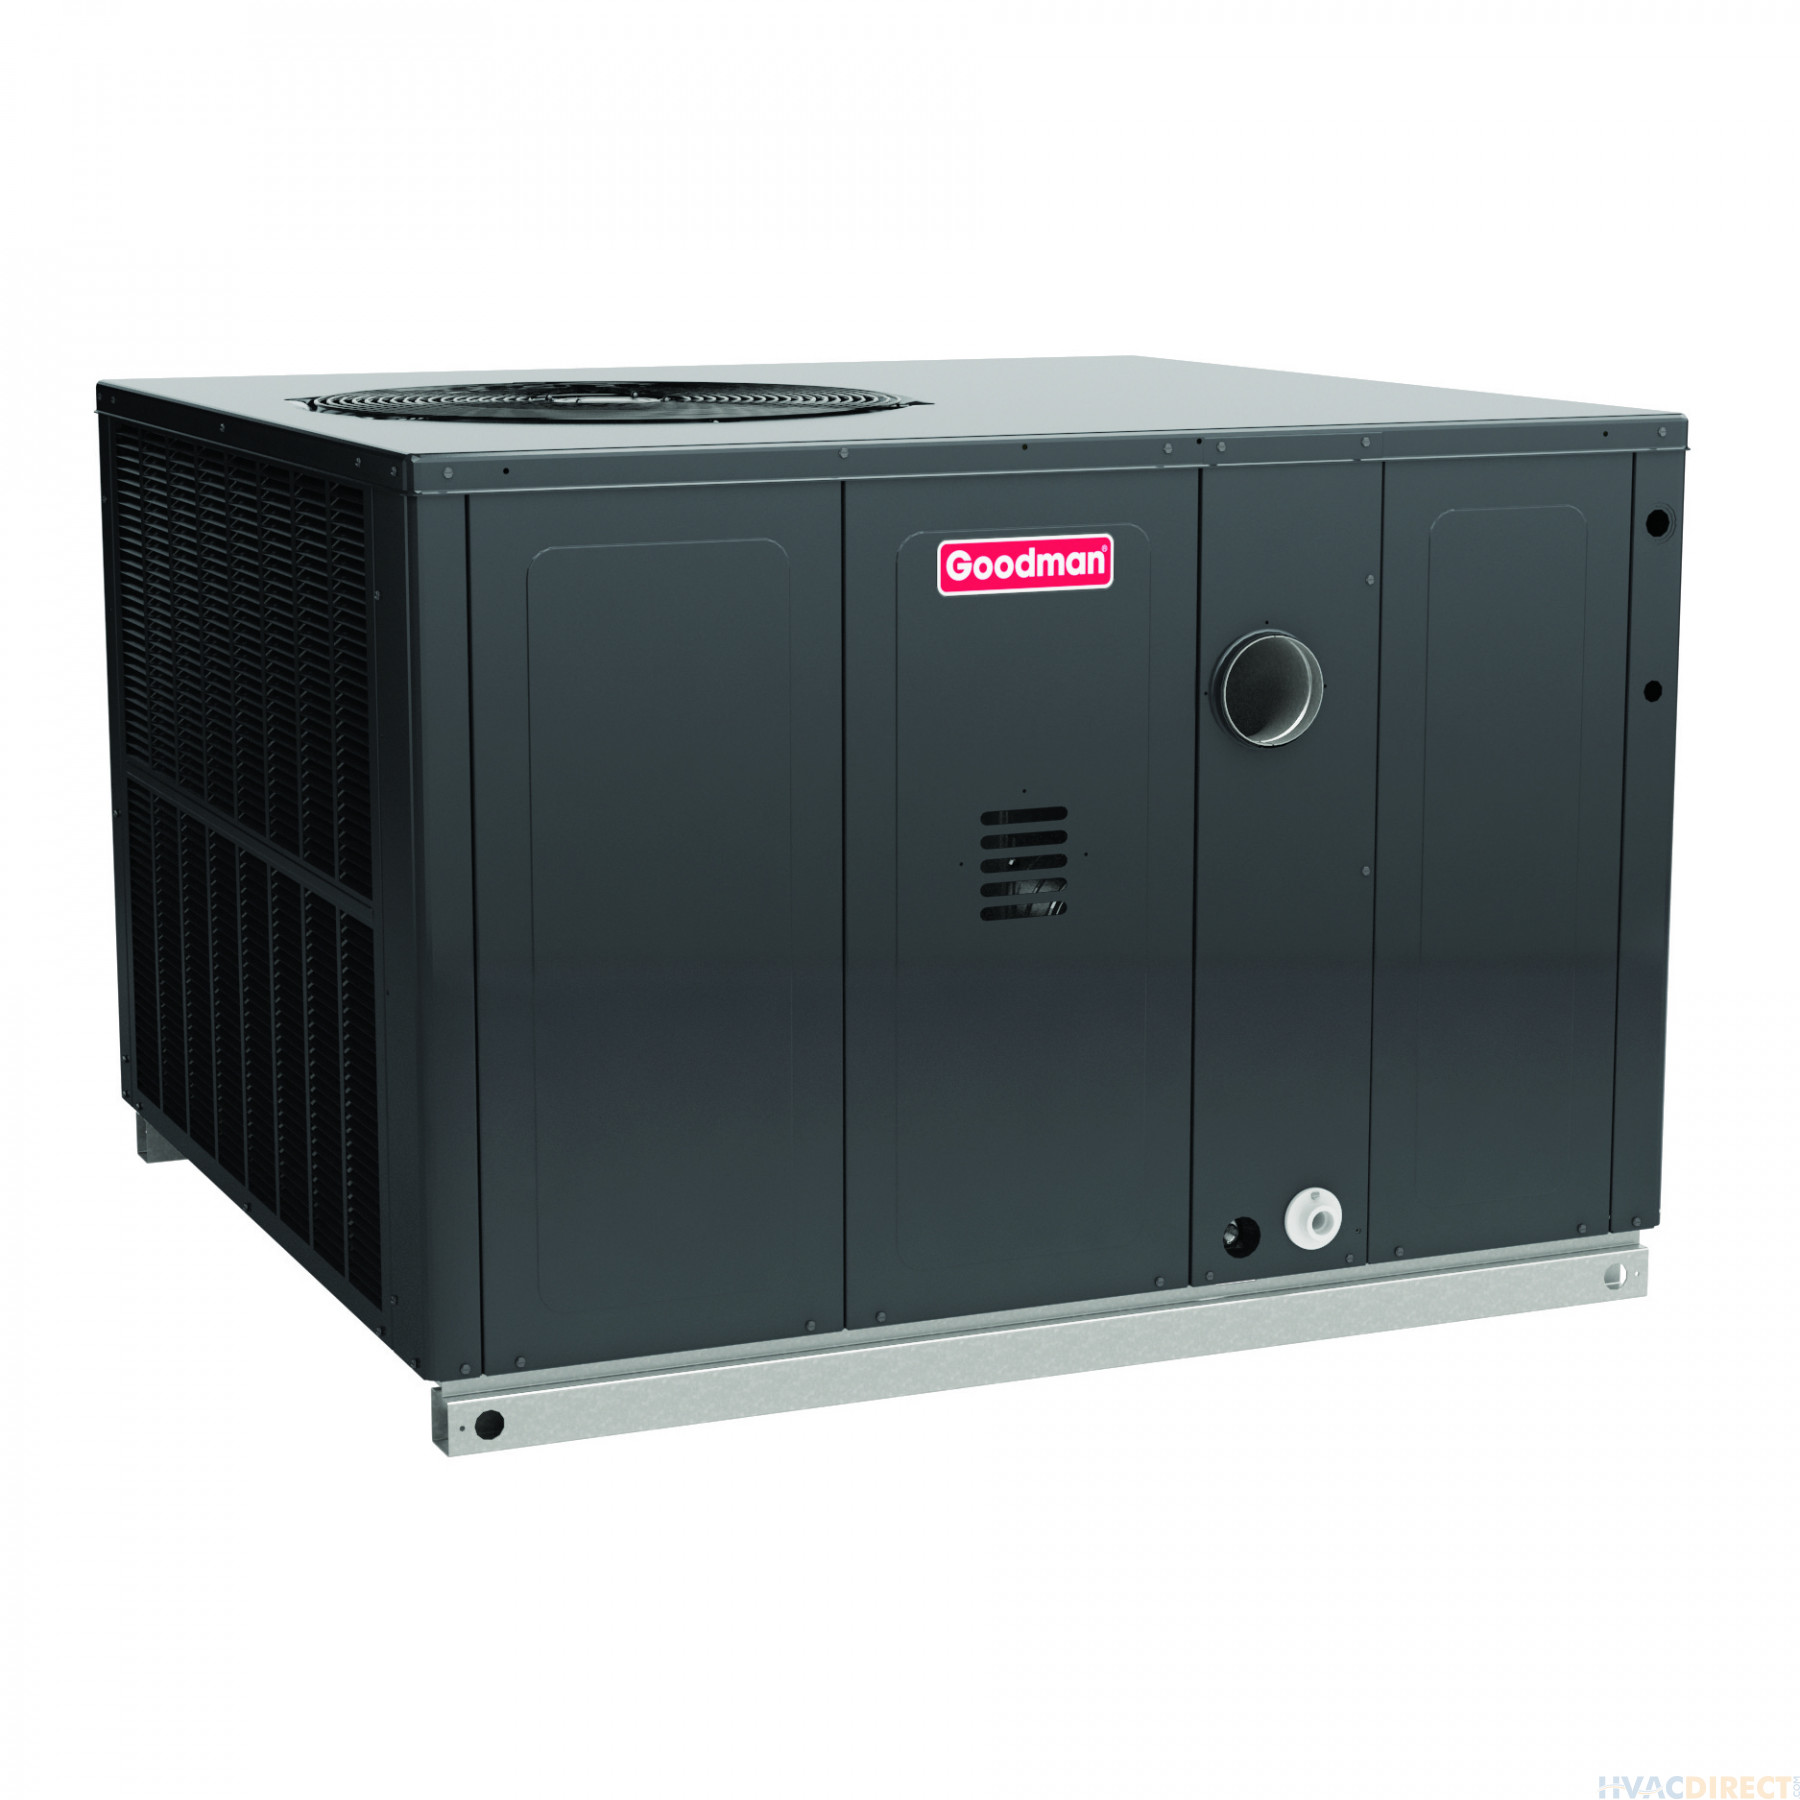 3 Ton 14 SEER 80,000 BTU Goodman Dual Fuel Heat Pump and Gas Package Unit - Front right